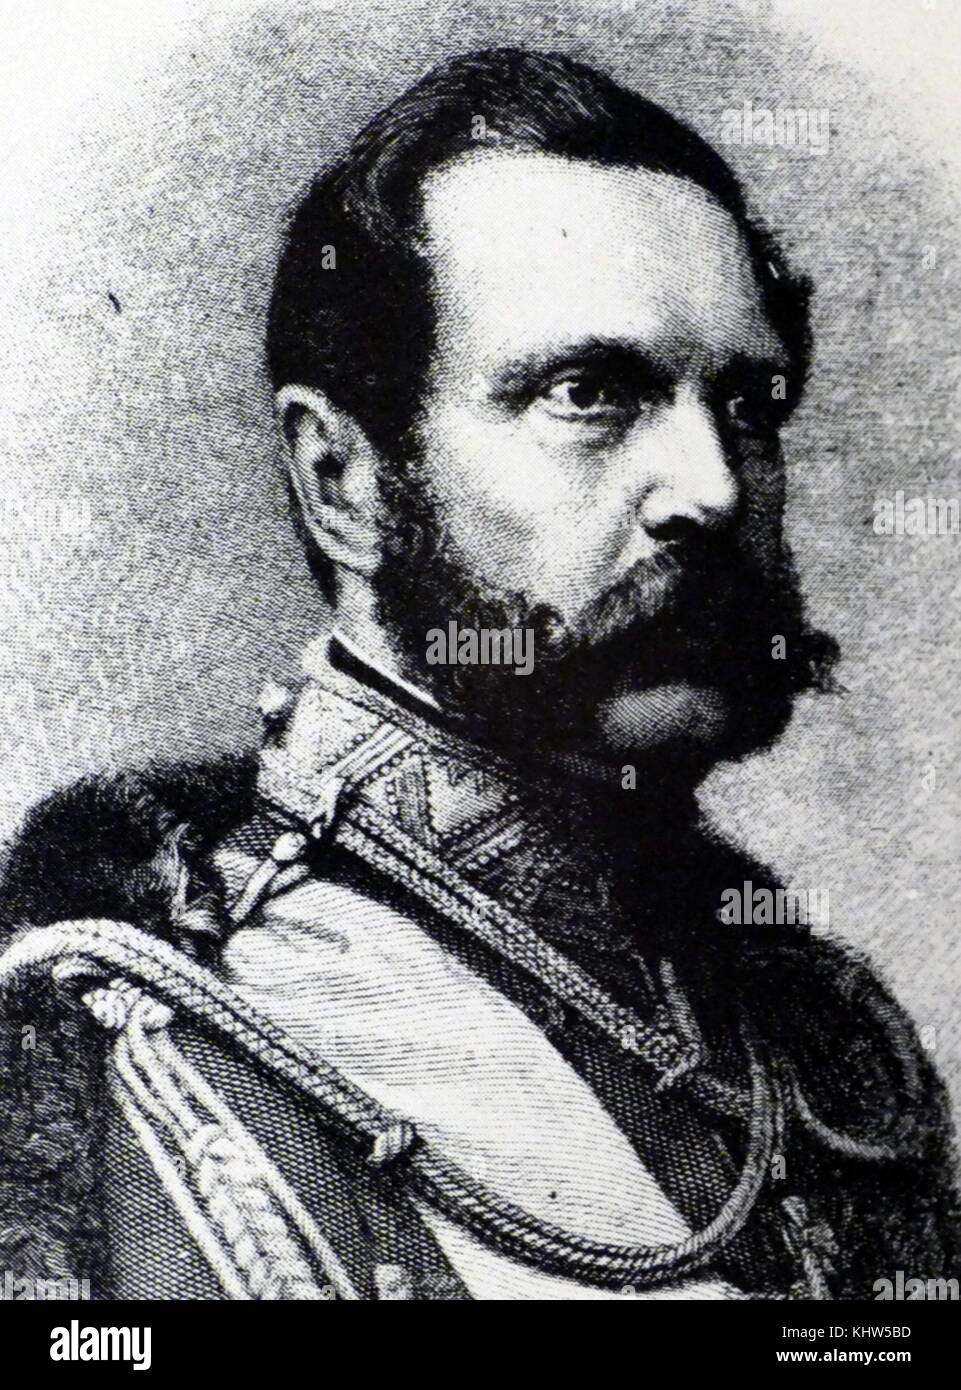 Portrait of Alexander II of Russia (1818-1881) the Emperor of Russia, King of Poland and Grand Duke of Finland until his assassination. Dated 19th Century Stock Photo